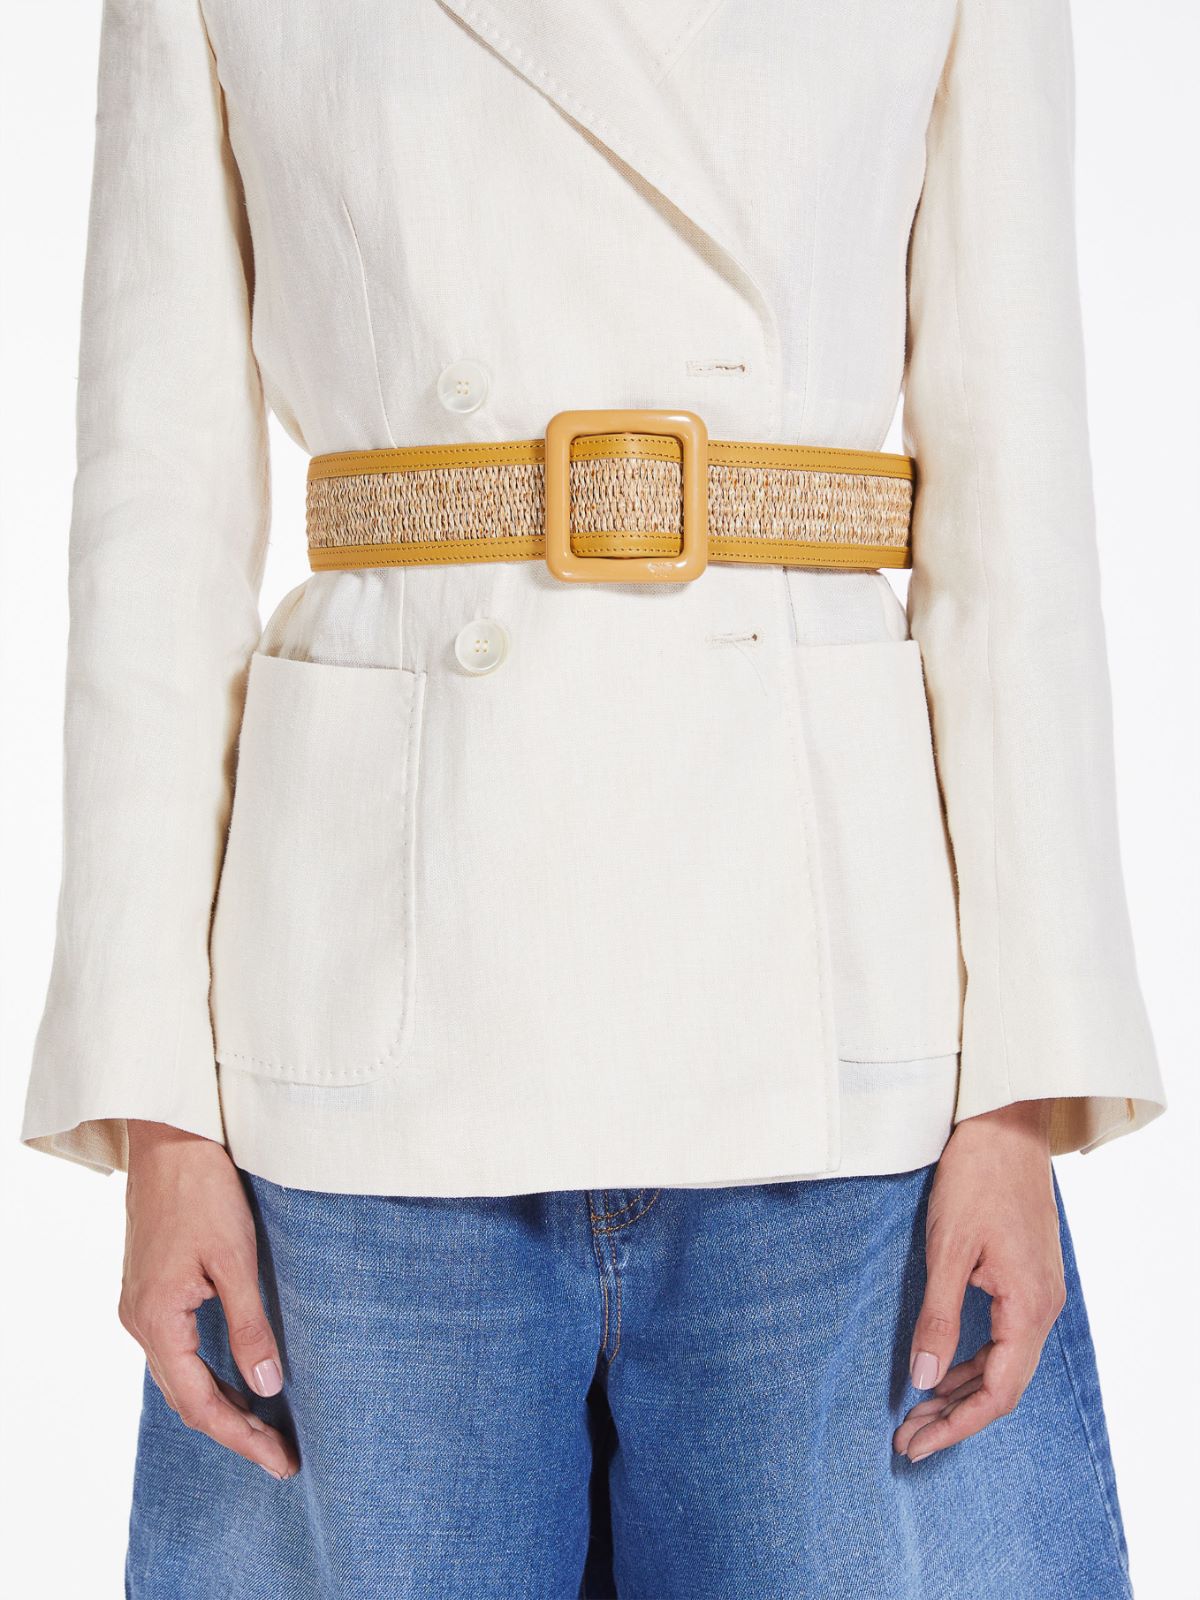 Cotton and leather belt - NATURAL - Weekend Max Mara - 3